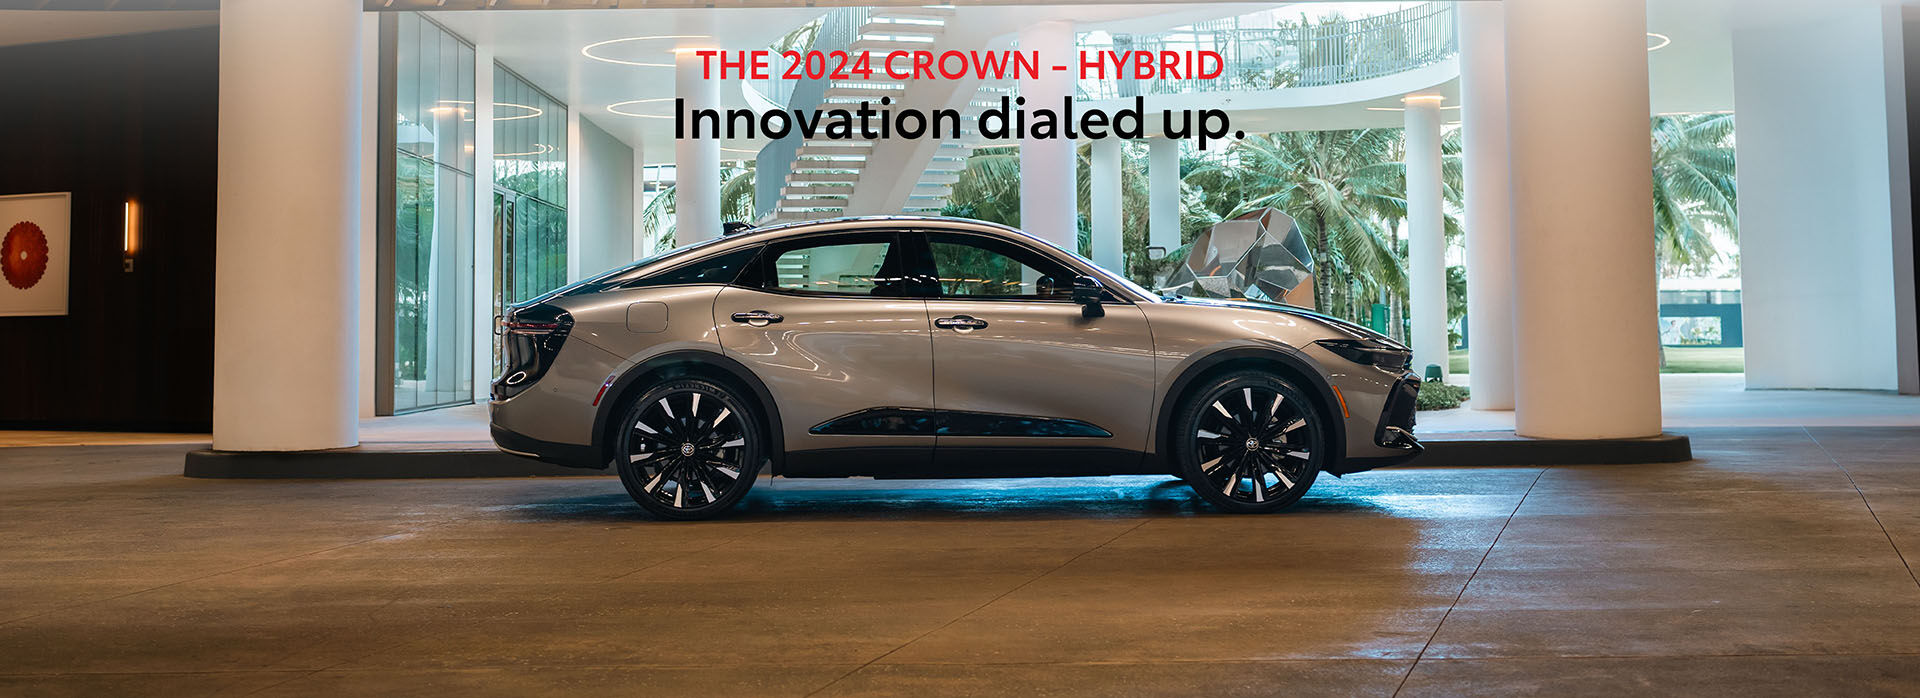 The 2023 Crown. Innovation dialed up.